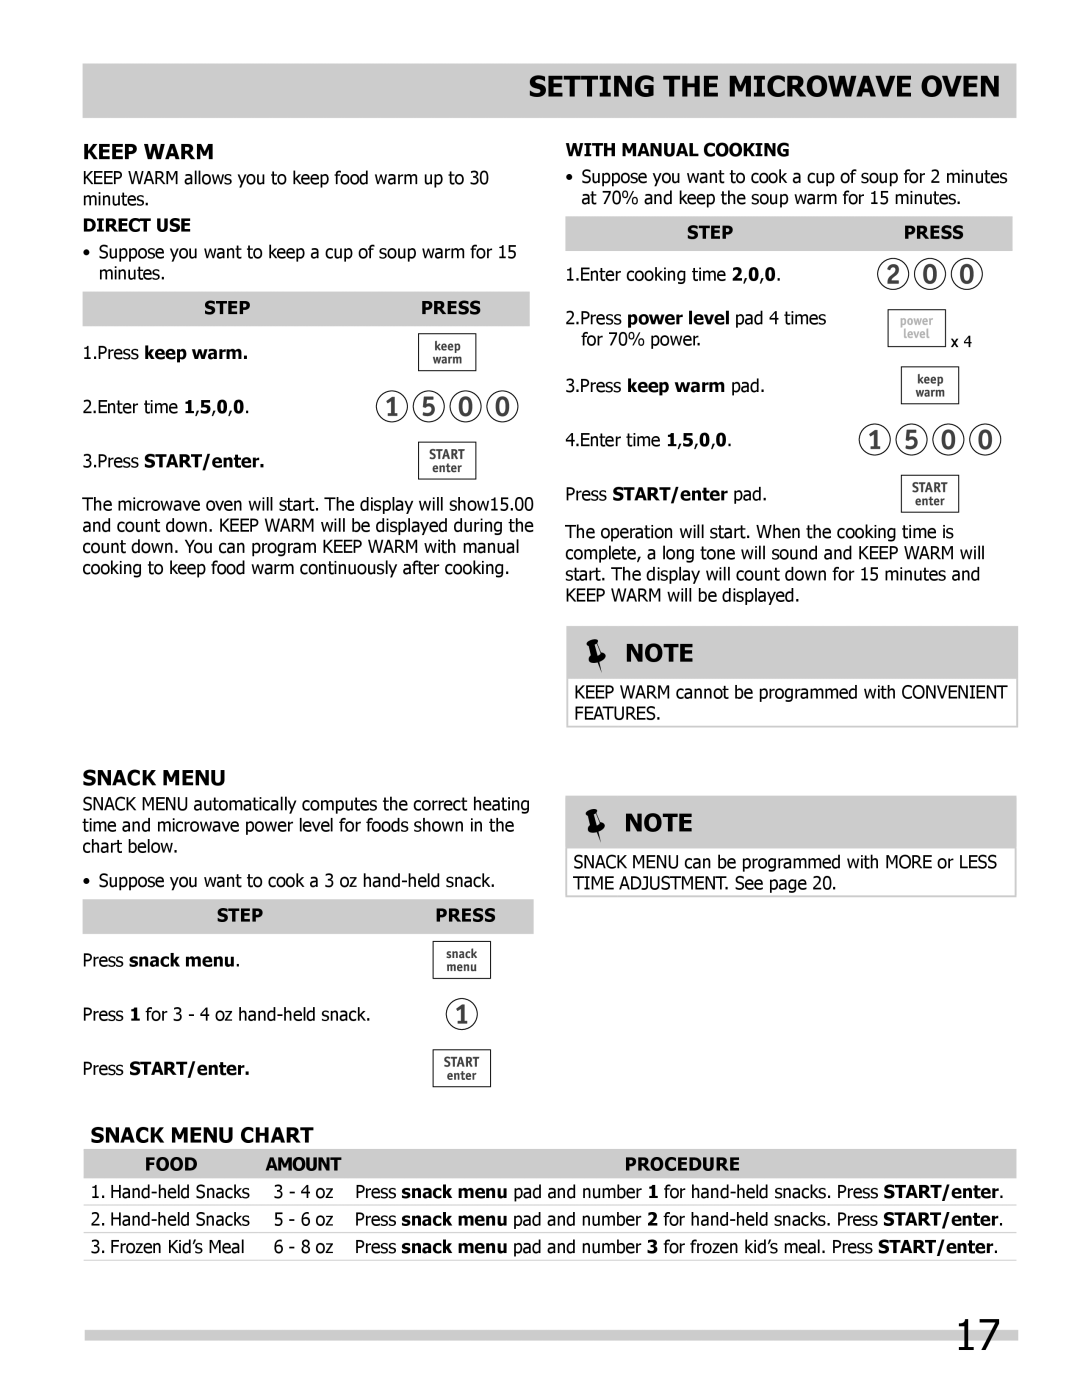 Frigidaire 318205300 Keep Warm, Snack Menu Chart, SETTING THE Microwave oven,  Note, Direct Use, Press START/enter 